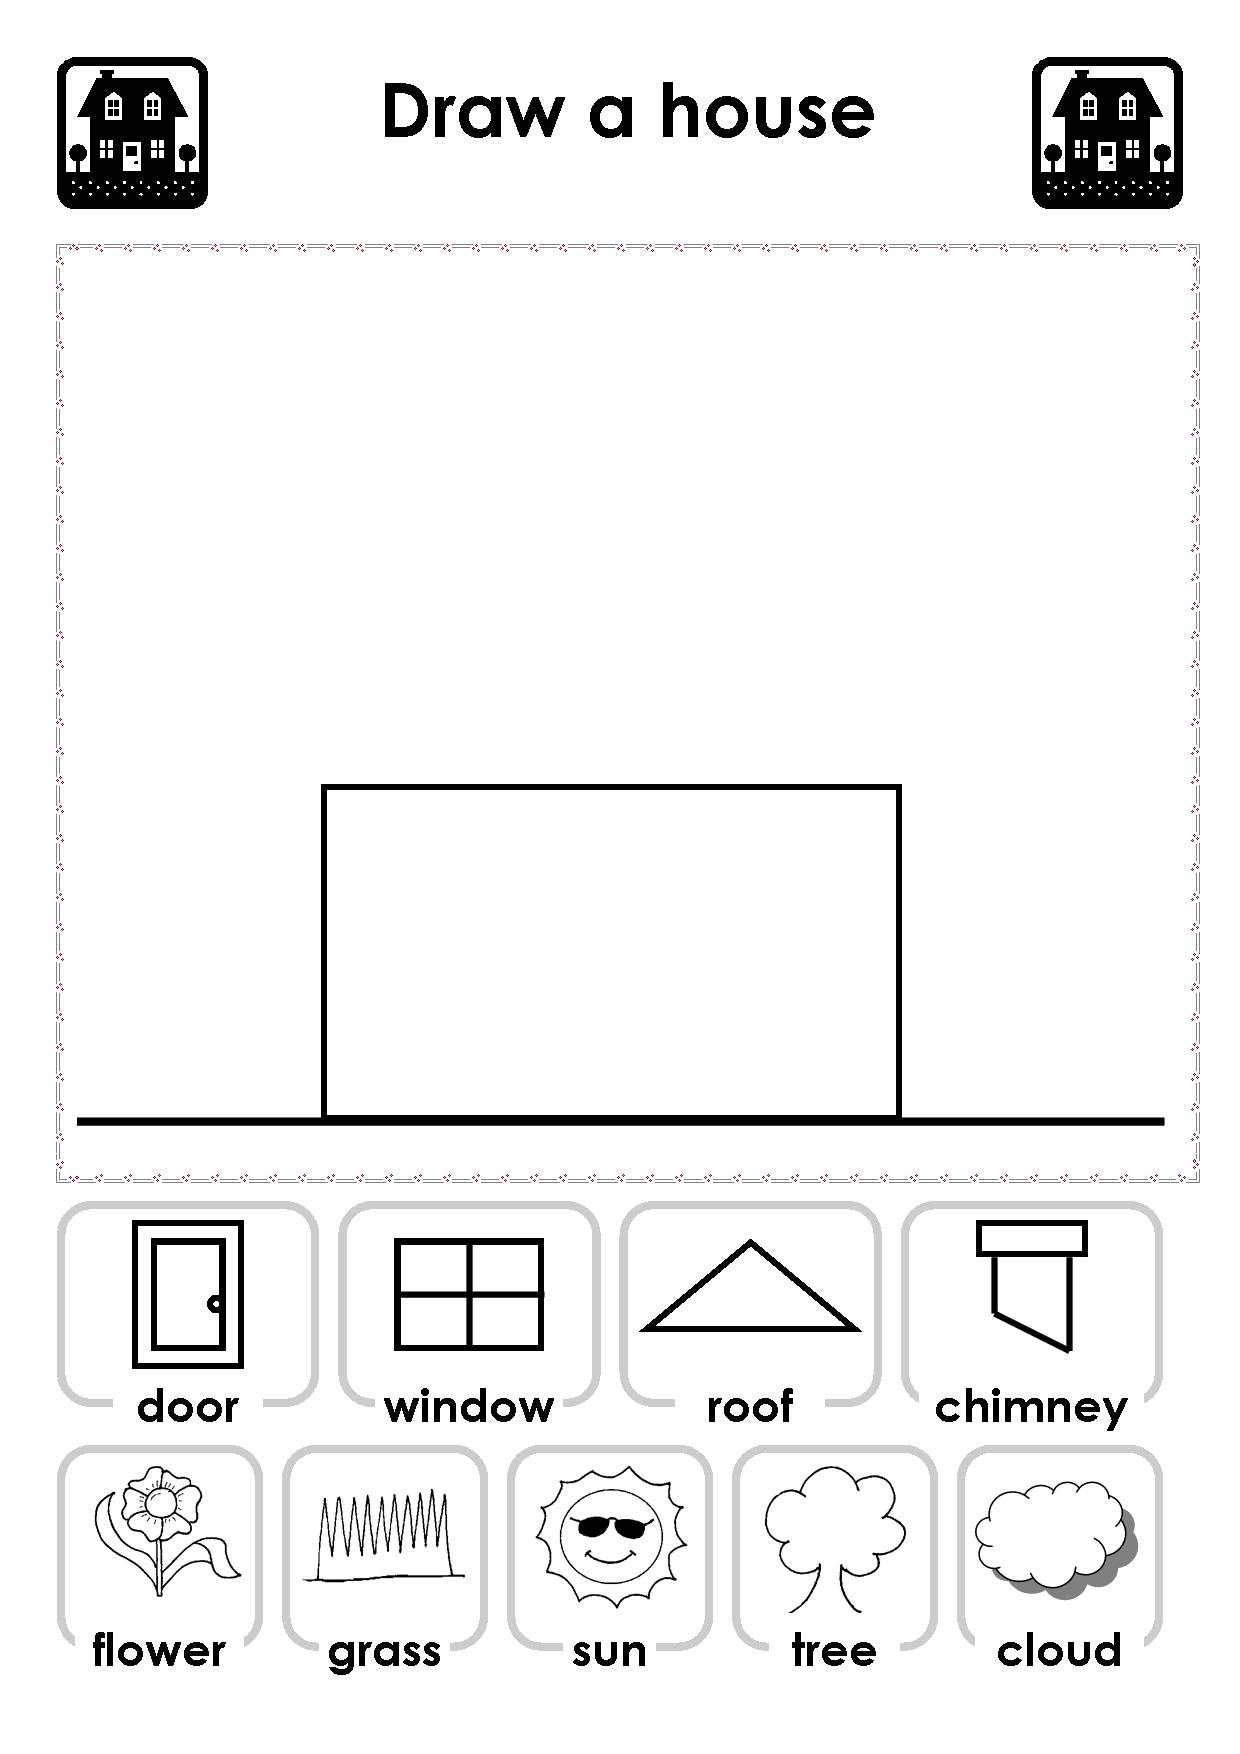 800 New preschool worksheet parts of the house 646 Draw a house Draw a house using matching pictures 